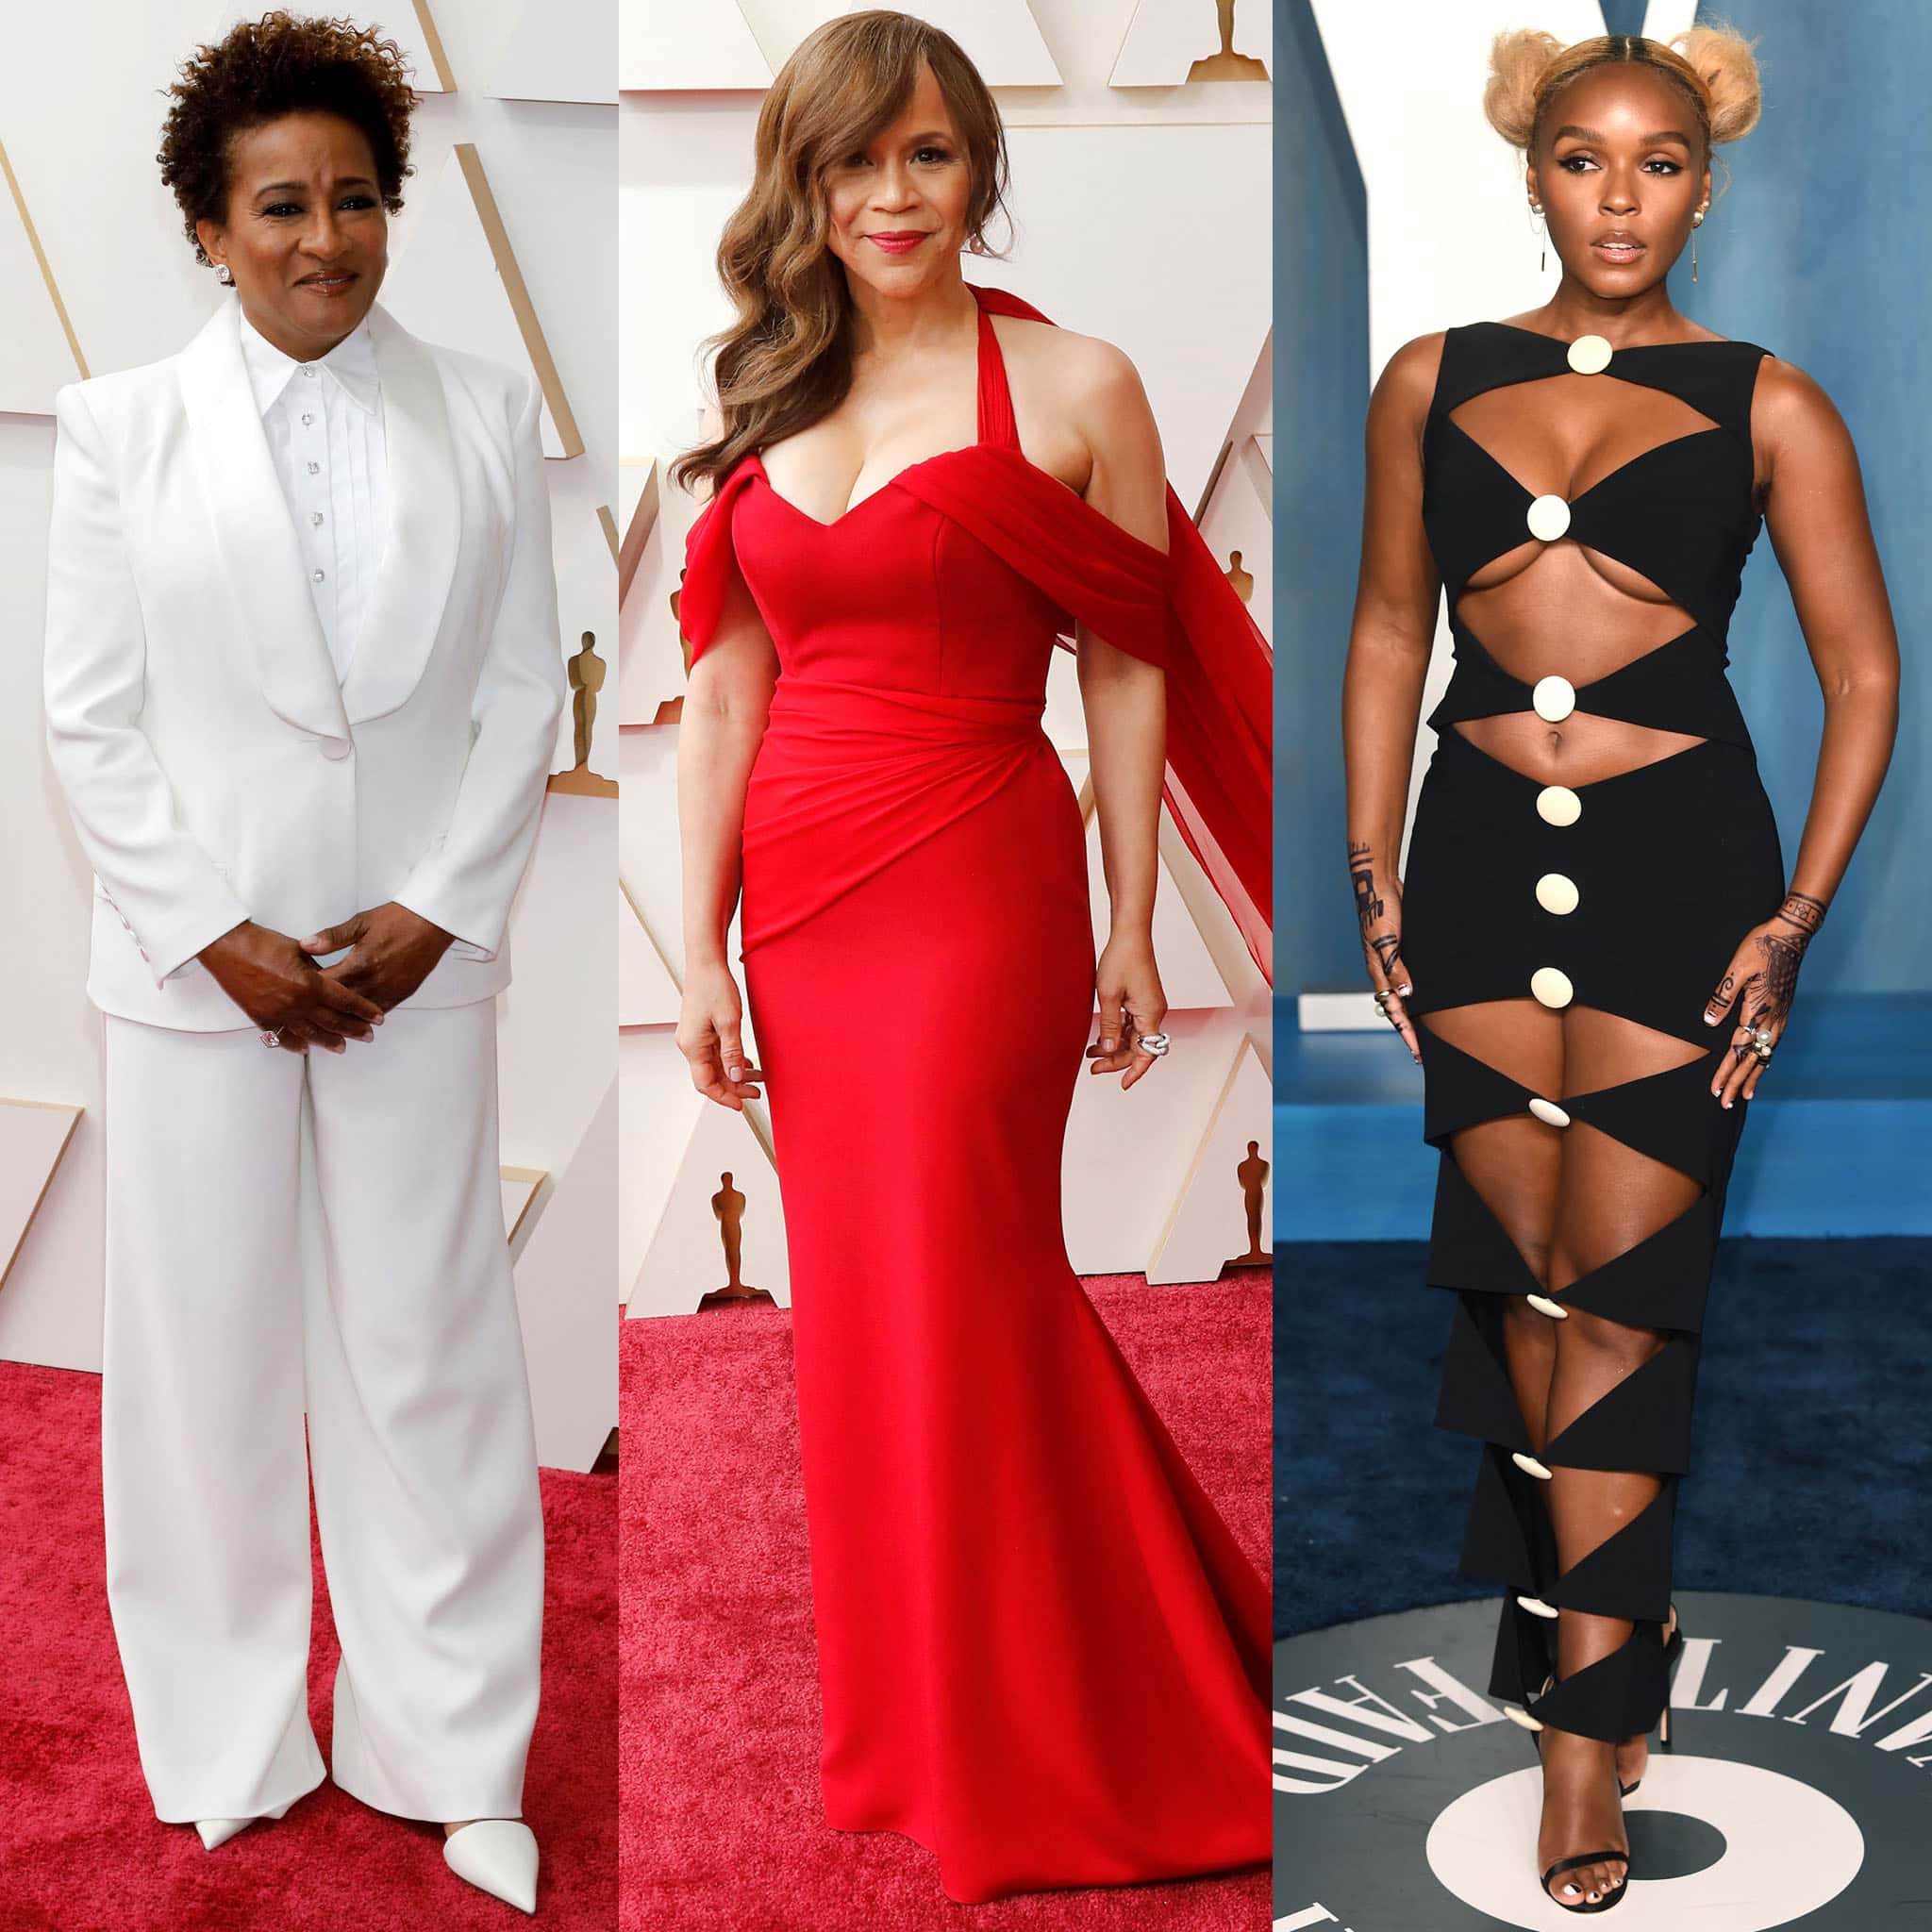 Wanda Sykes, Rosie Perez, and Janelle Monae wore Christian Siriano at the 2022 Oscars and Vanity Fair Oscar Party